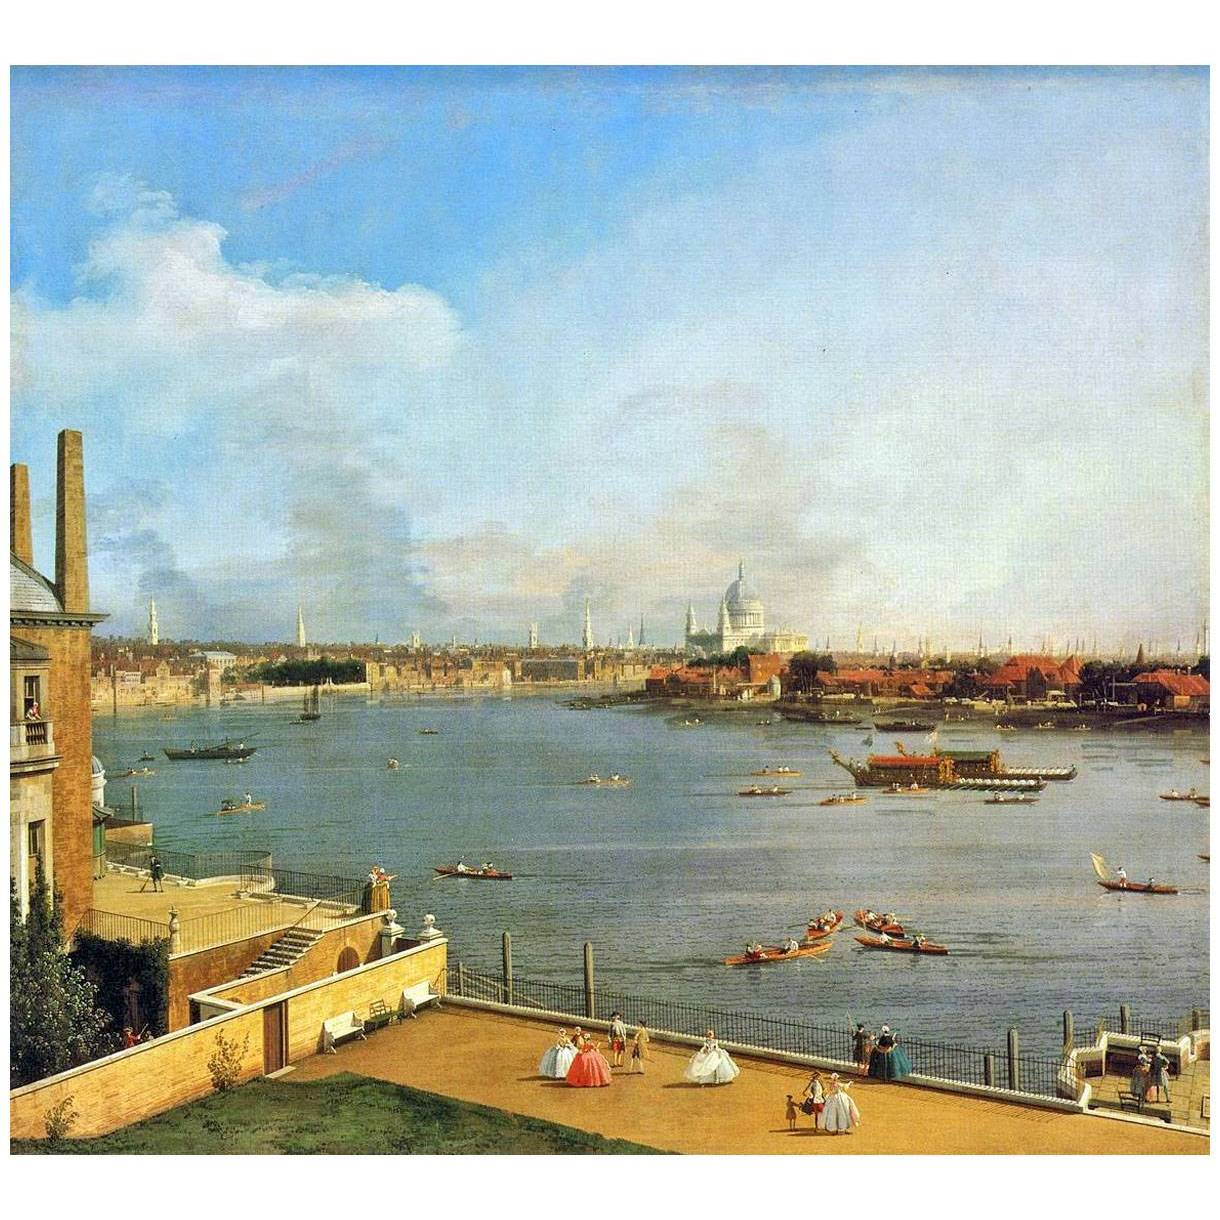 Canaletto. The Thames from Richmond House. 1746. Goodwood House Richmond